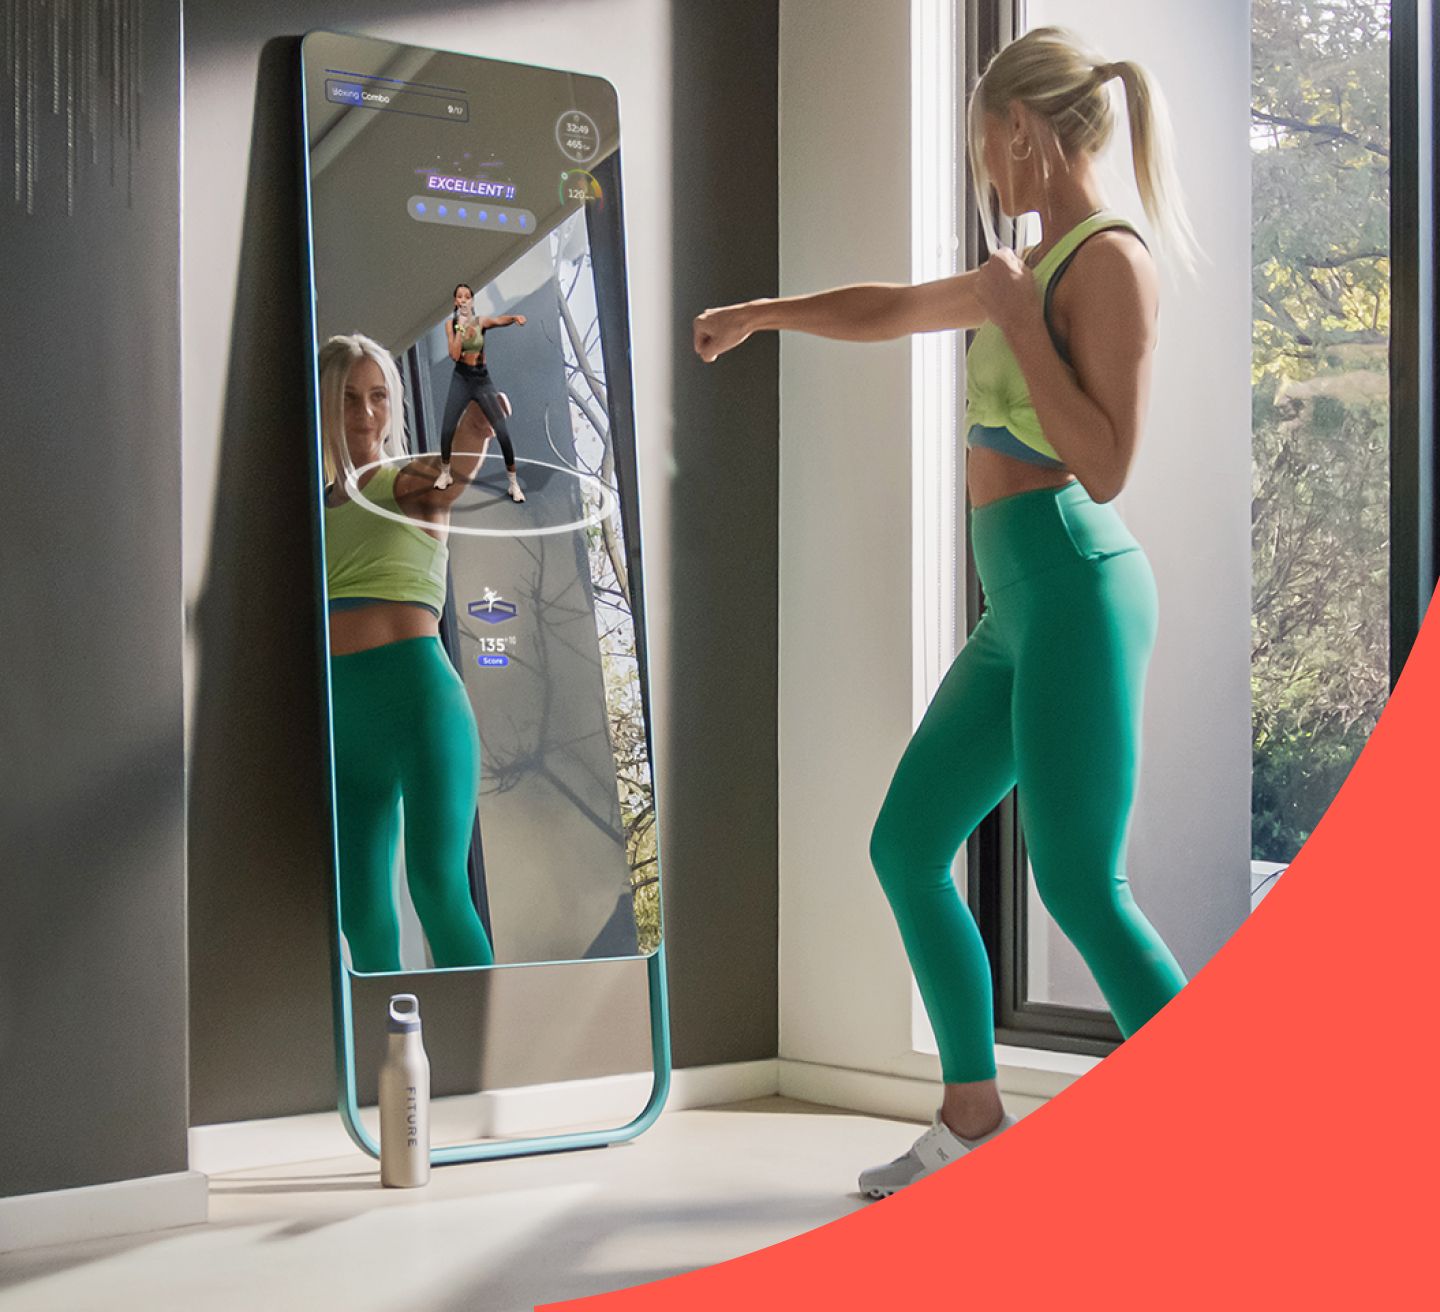 The future of fitness is yours